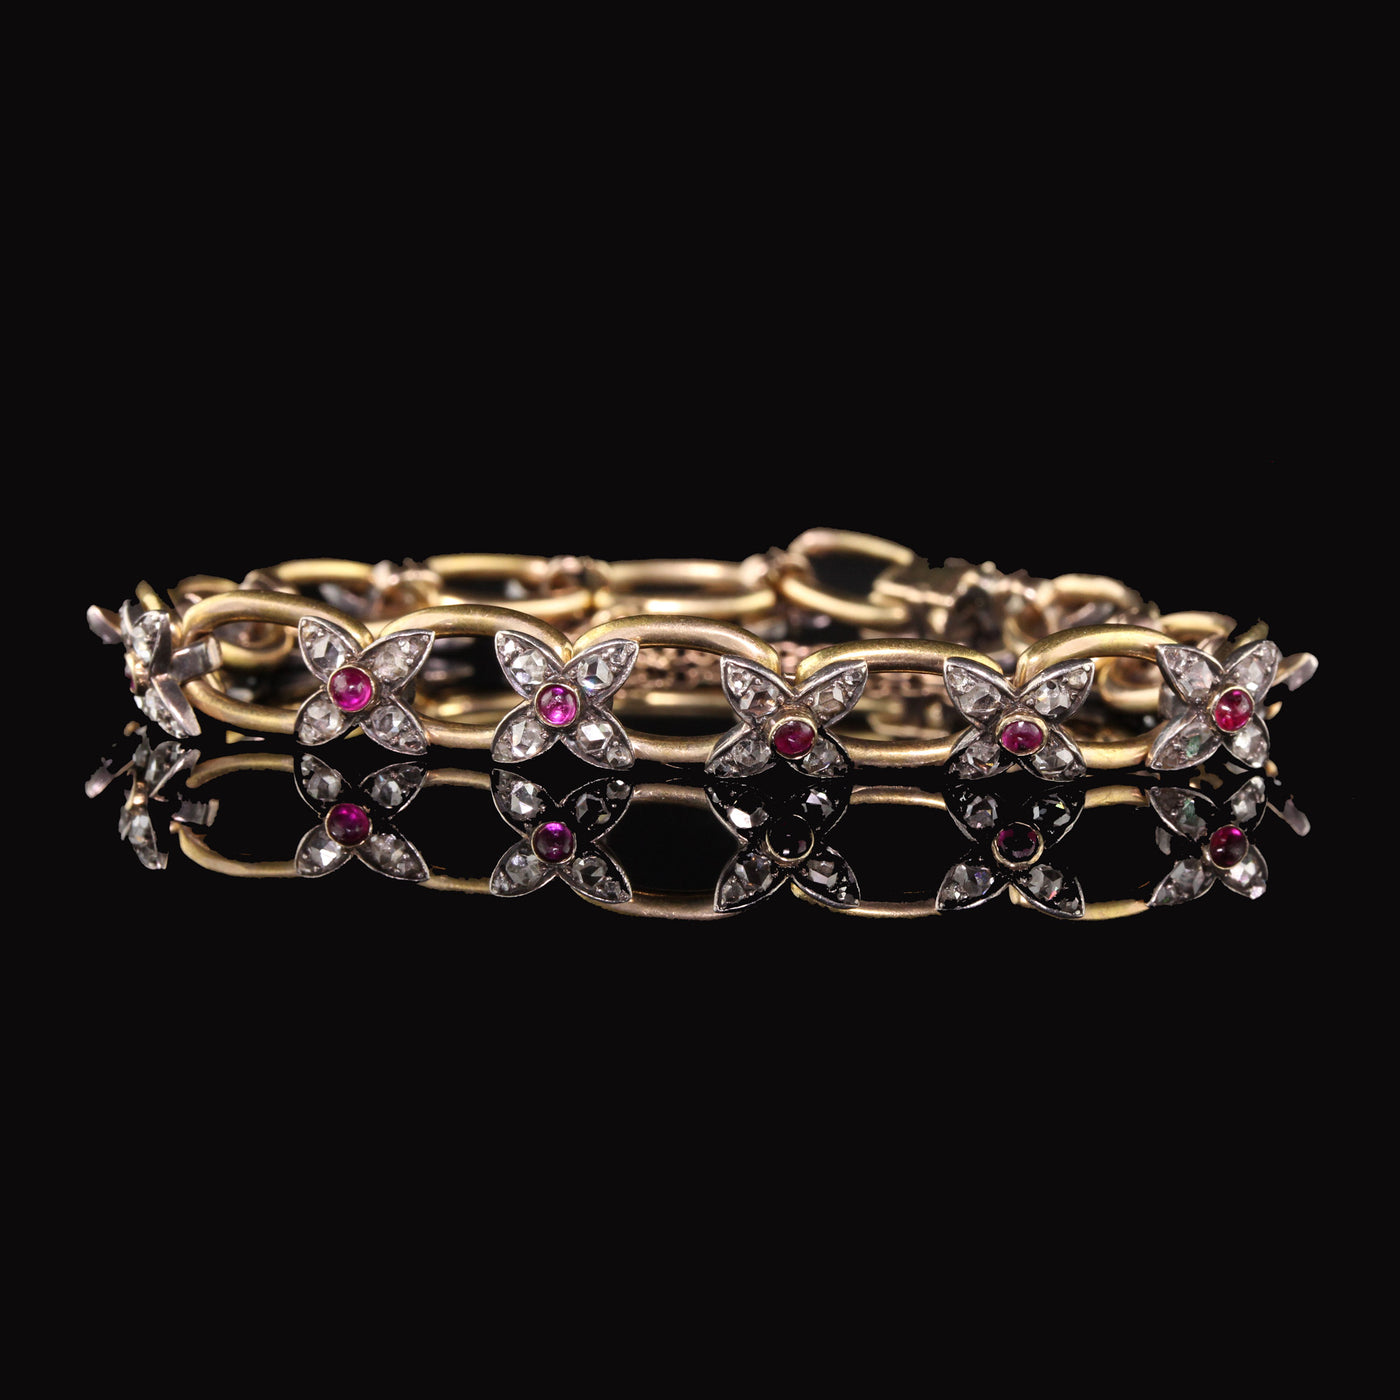 Antique Victorian 18K Yellow Gold and Silver Rose Cut Diamond and Ruby Bracelet